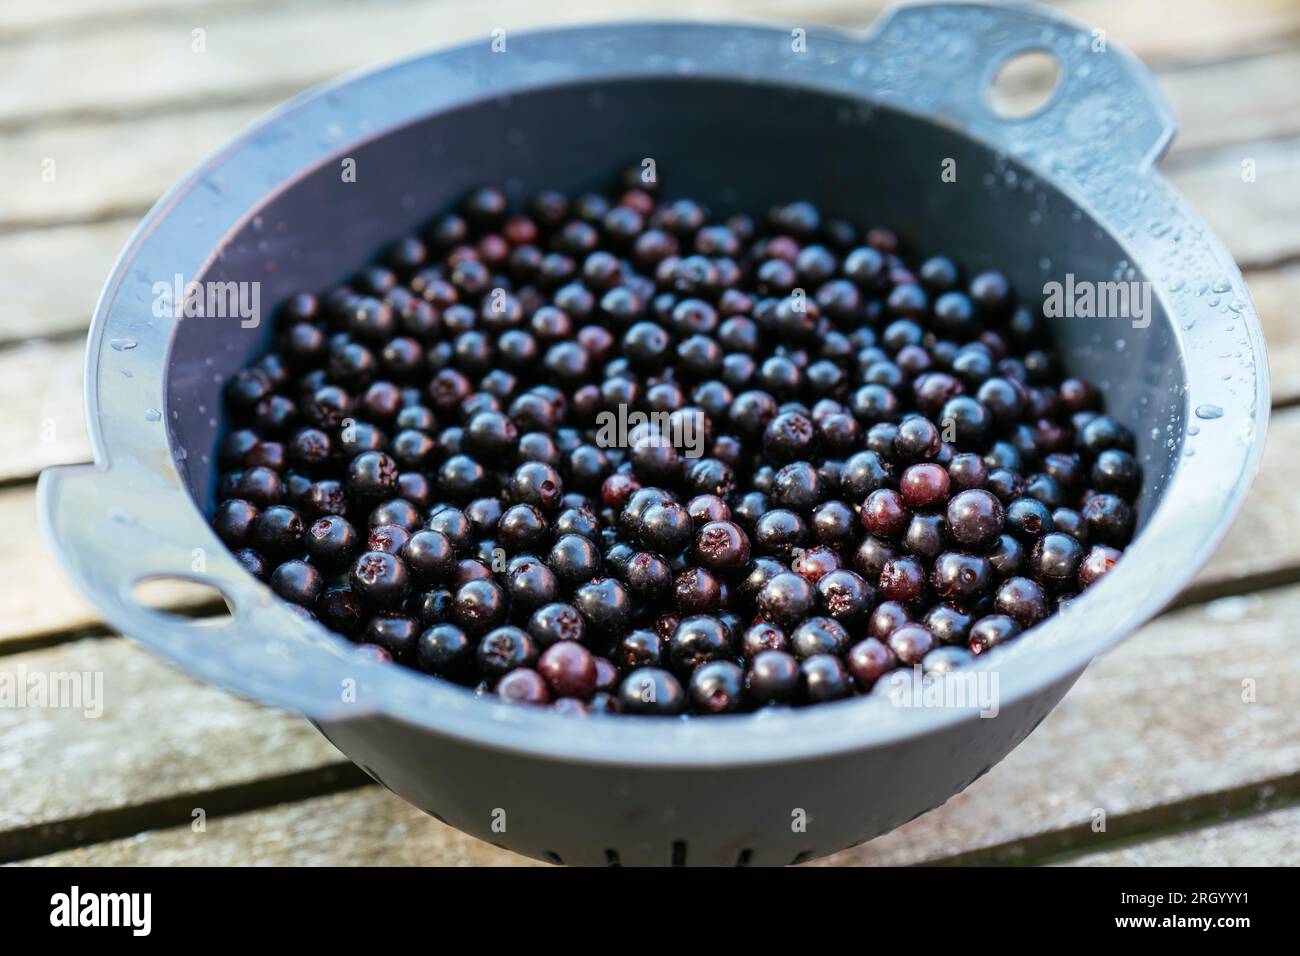 Colander with freshly harvested aronia berries. Stock Photo